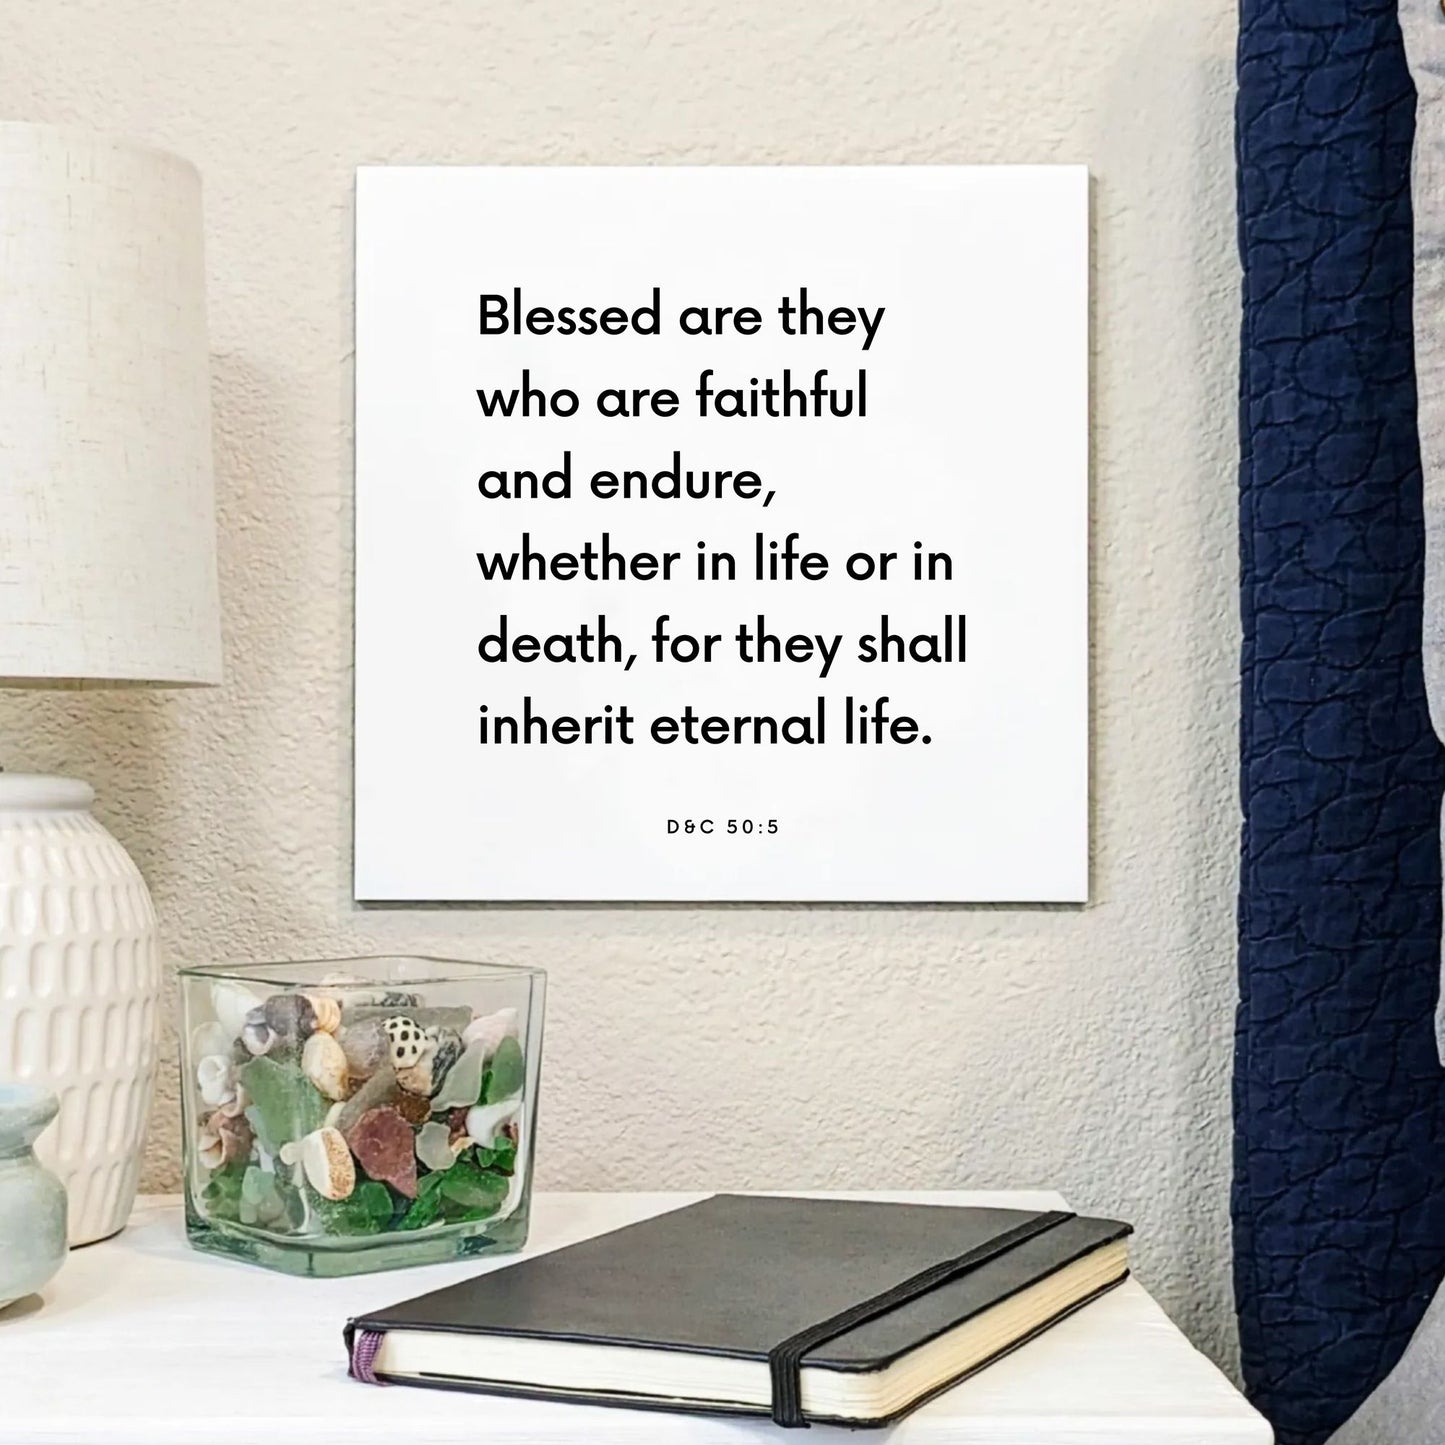 Bedside mouting of the scripture tile for D&C 50:5 - "Blessed are they who are faithful and endure"